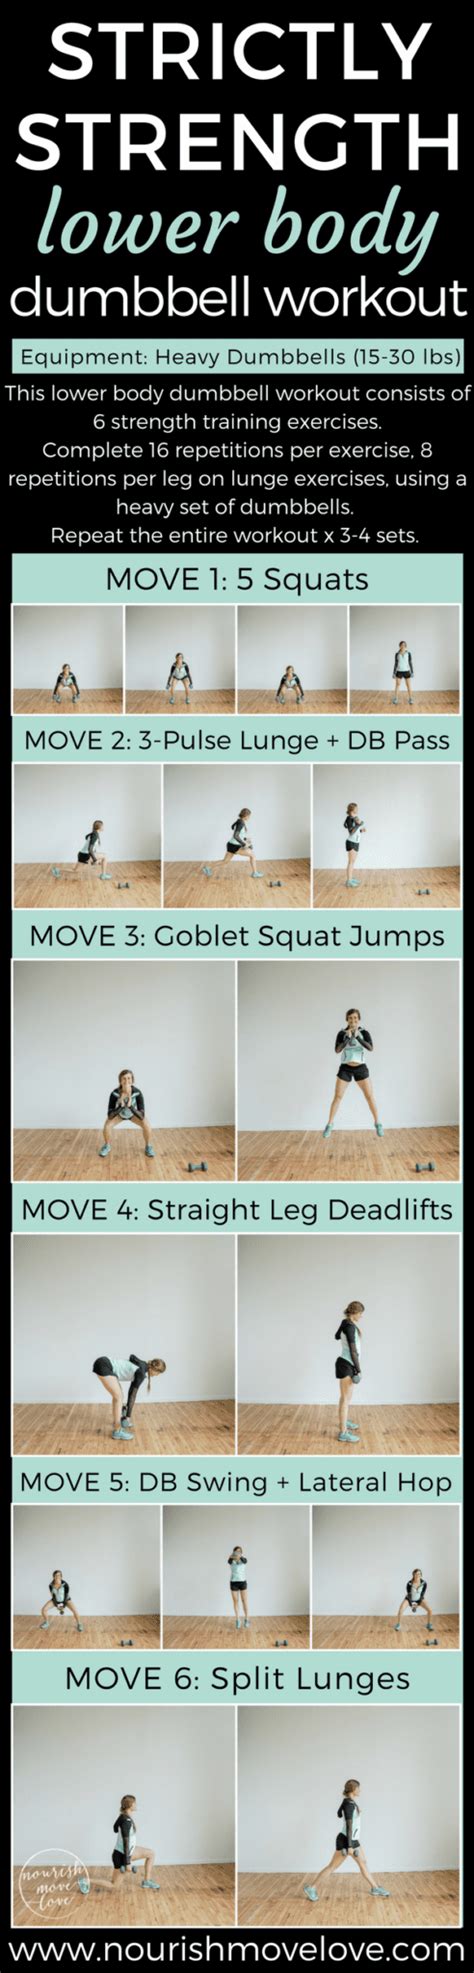 Strictly Strength Lower Body Dumbbell Workout Nourish Move Love